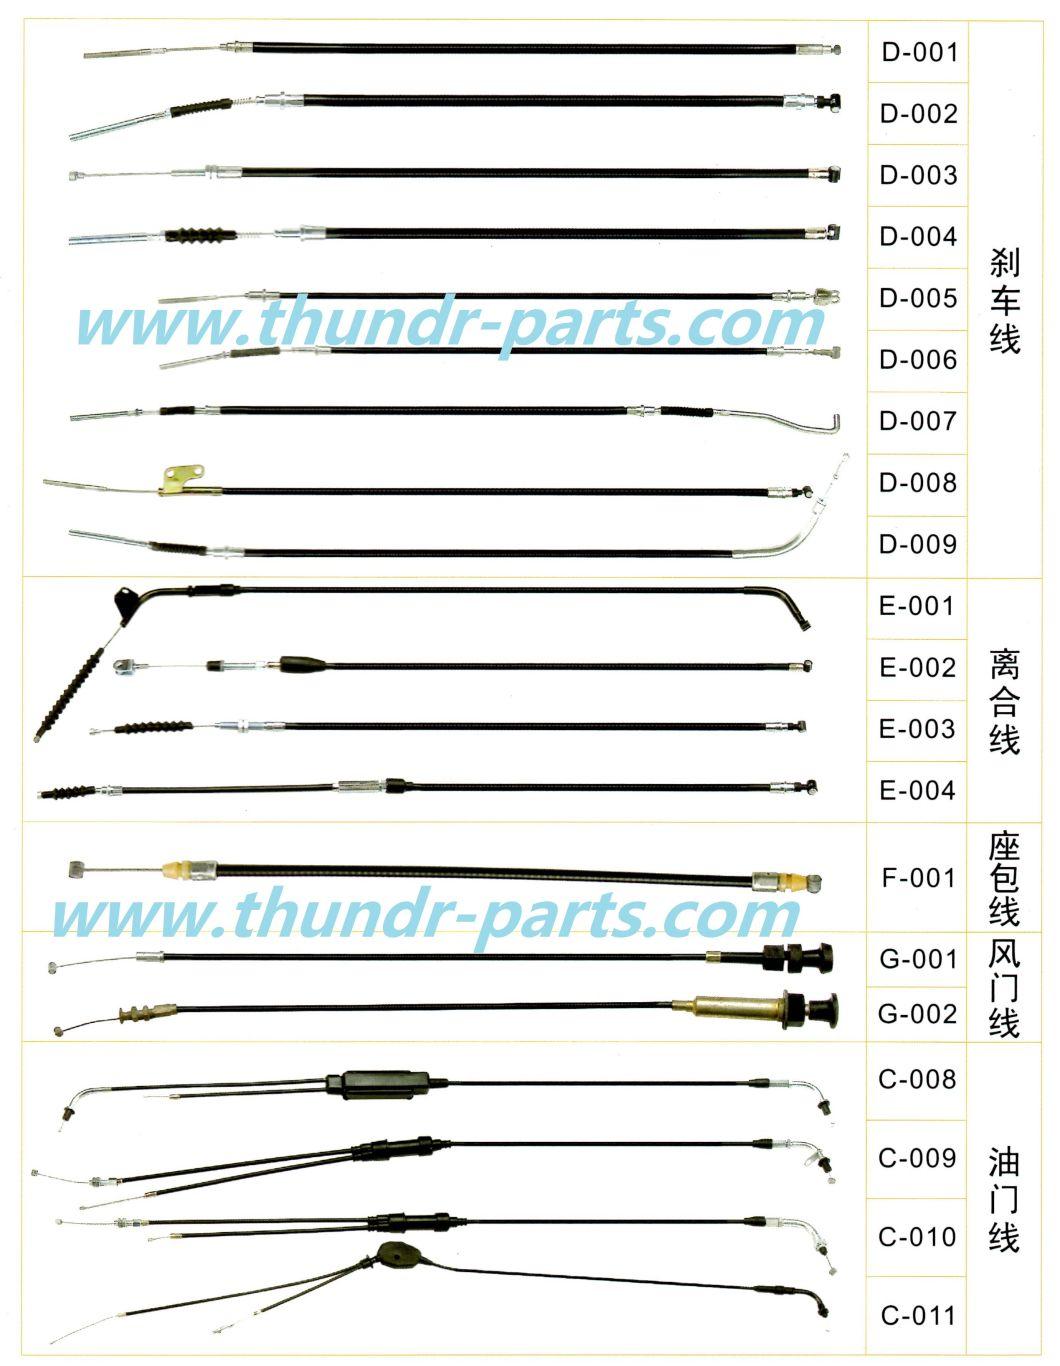 Motorcycle Cables for Brake/Speedometer/Meter/Tachometer/Throttle/Gas/Clutch/Choke Pgt Mbk Piaggio